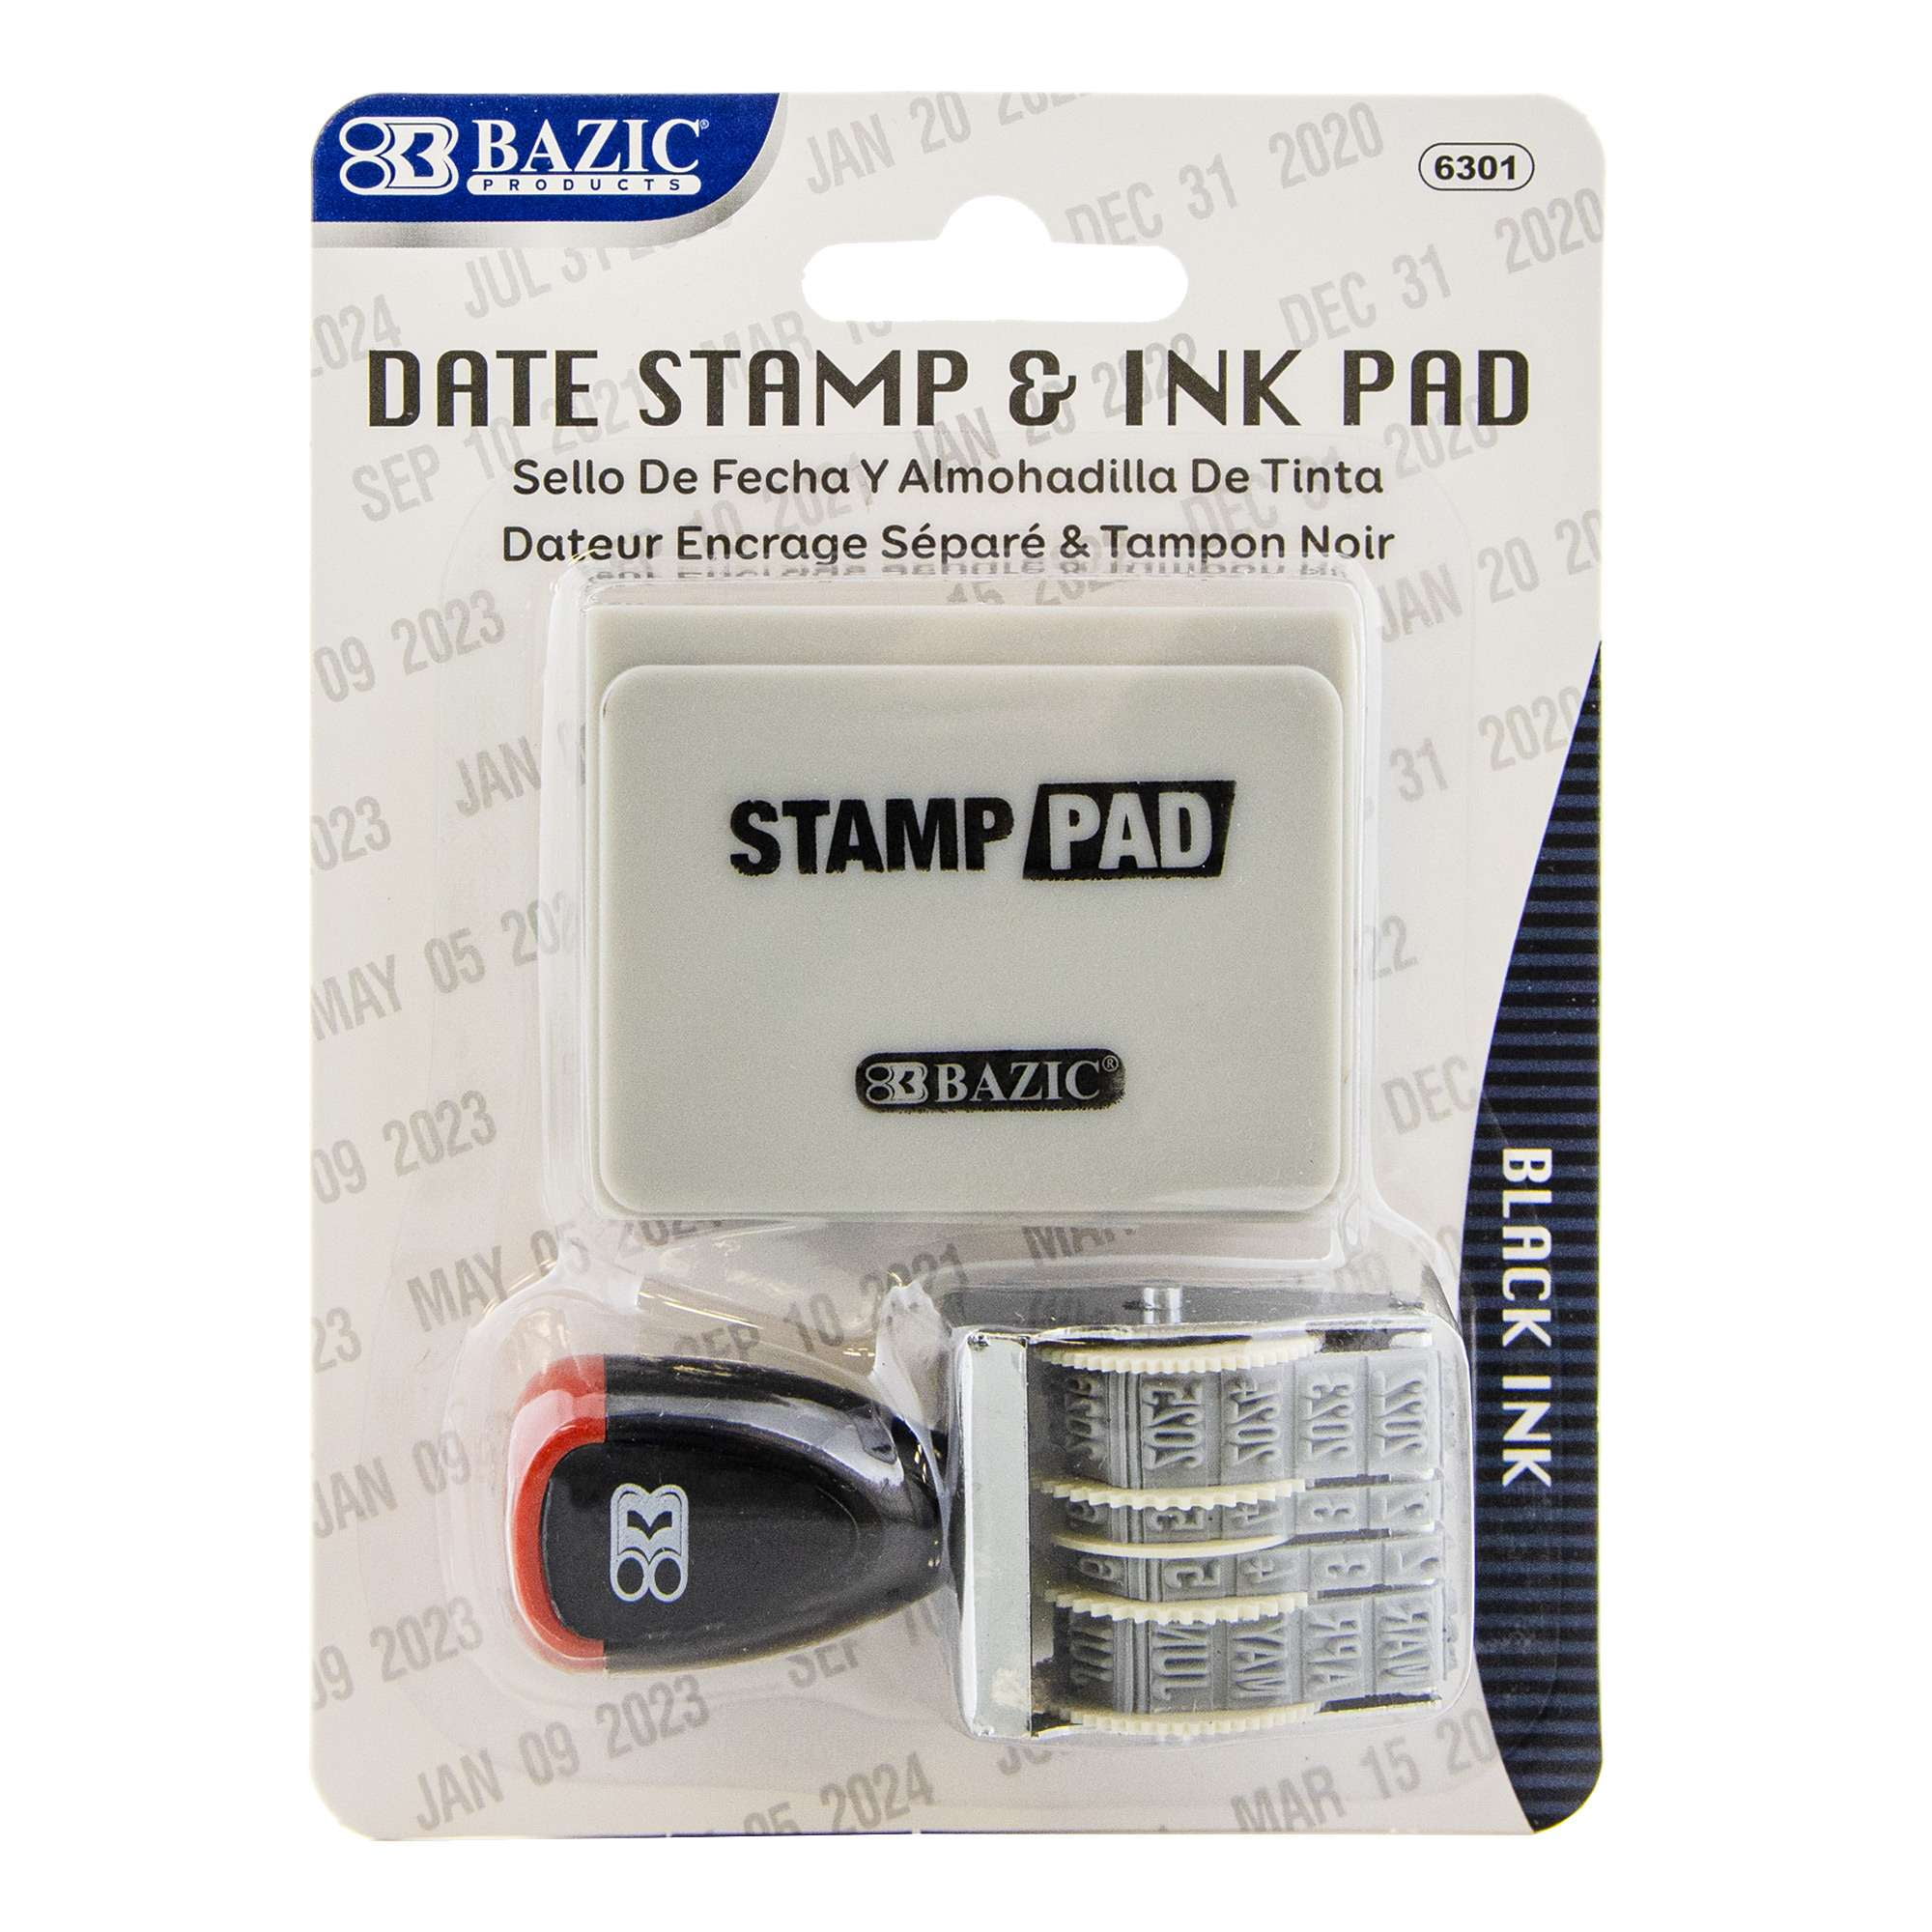 ExcelMark Green Ink Pad for Rubber Stamps 2-1/8 inch by 3-1/4 inch, Blue